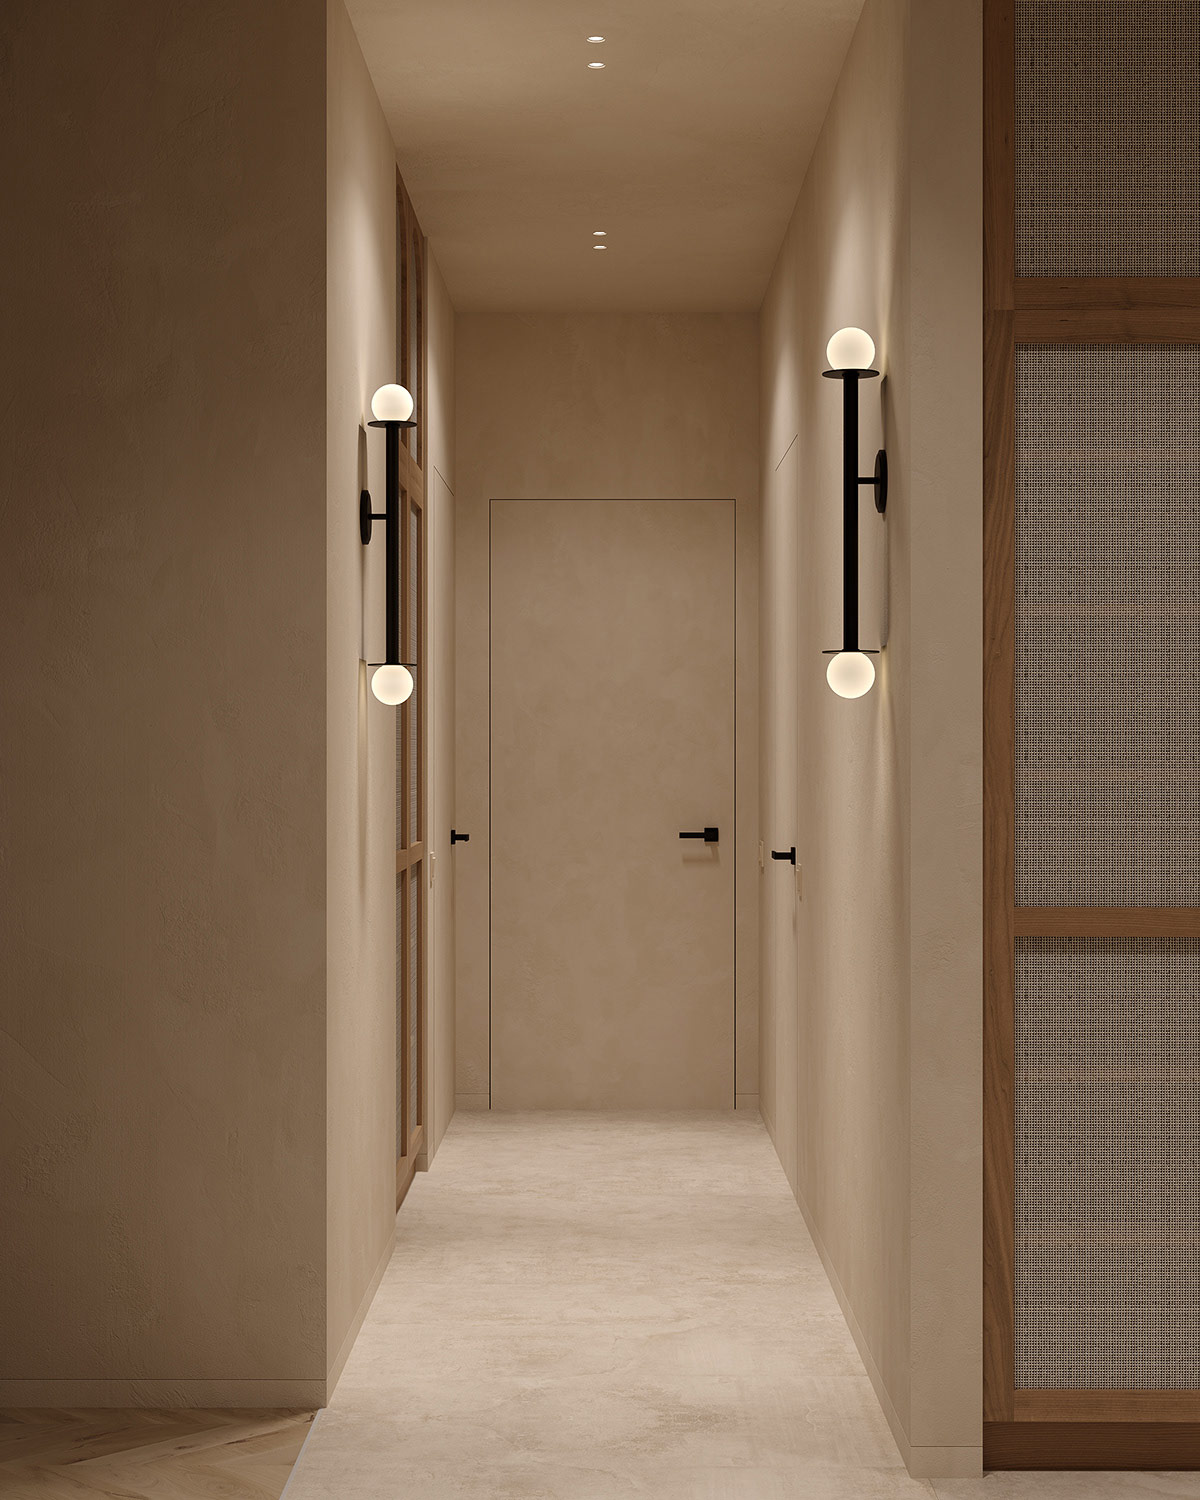 Use of modern wall sconces to design and execute interior decoration